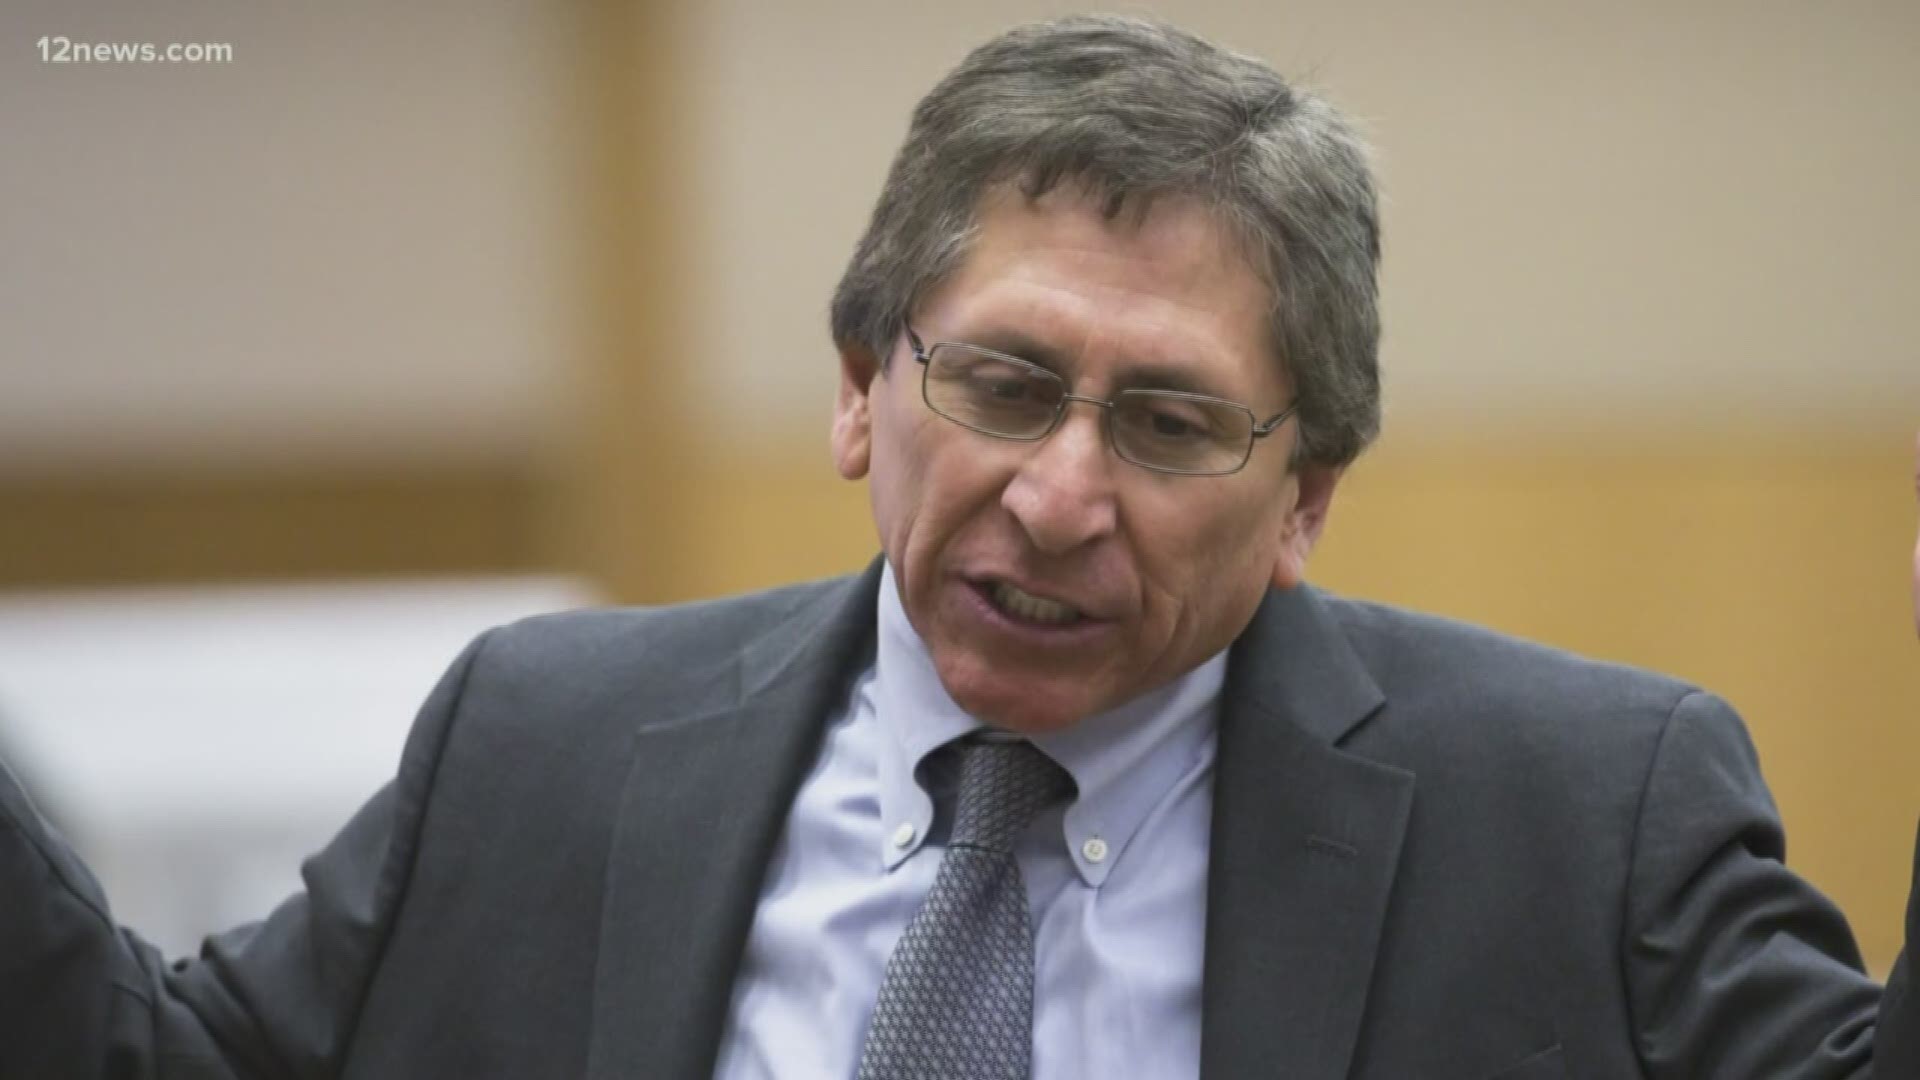 Maricopa County prosecutor Juan Martinez will no longer be handling cases involving the death penalty, according to the Maricopa County Attorney's Office.